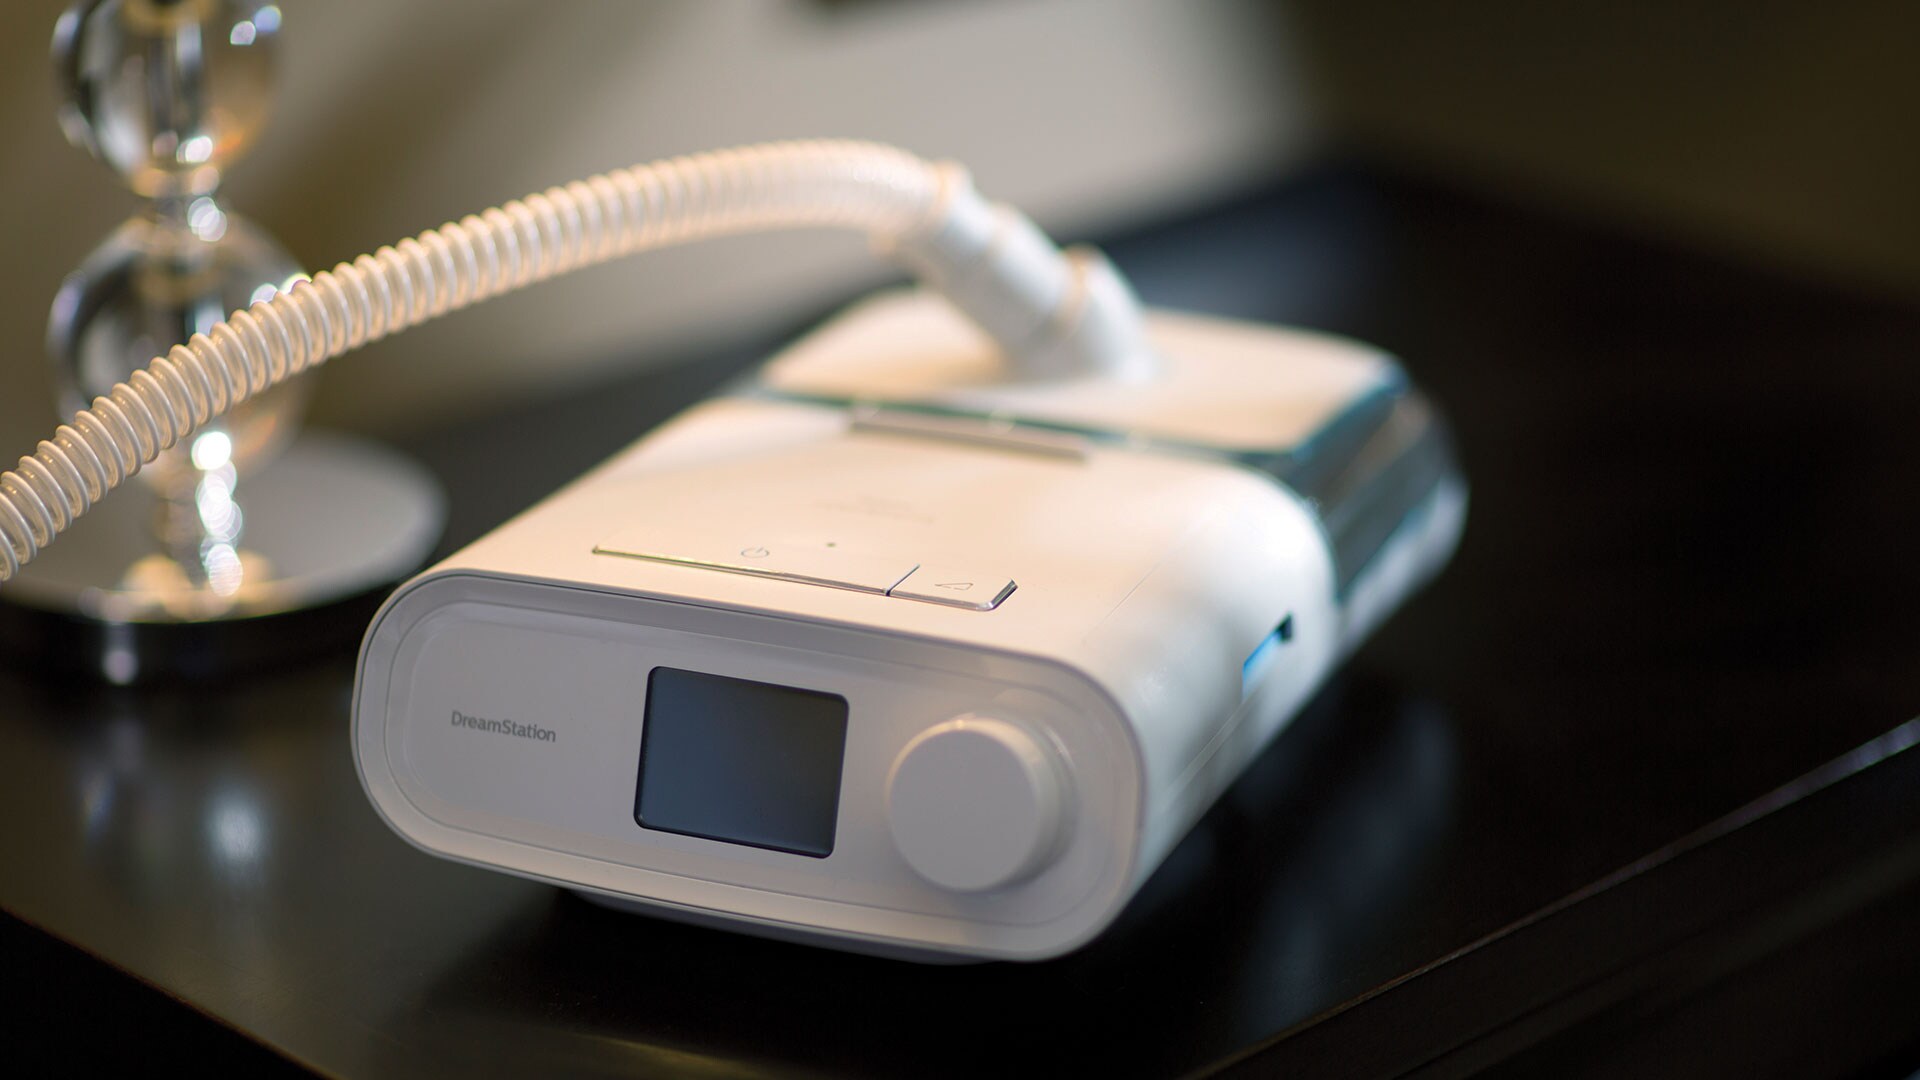 Philips provides update on completed set of test results for first-generation DreamStation sleep therapy devices